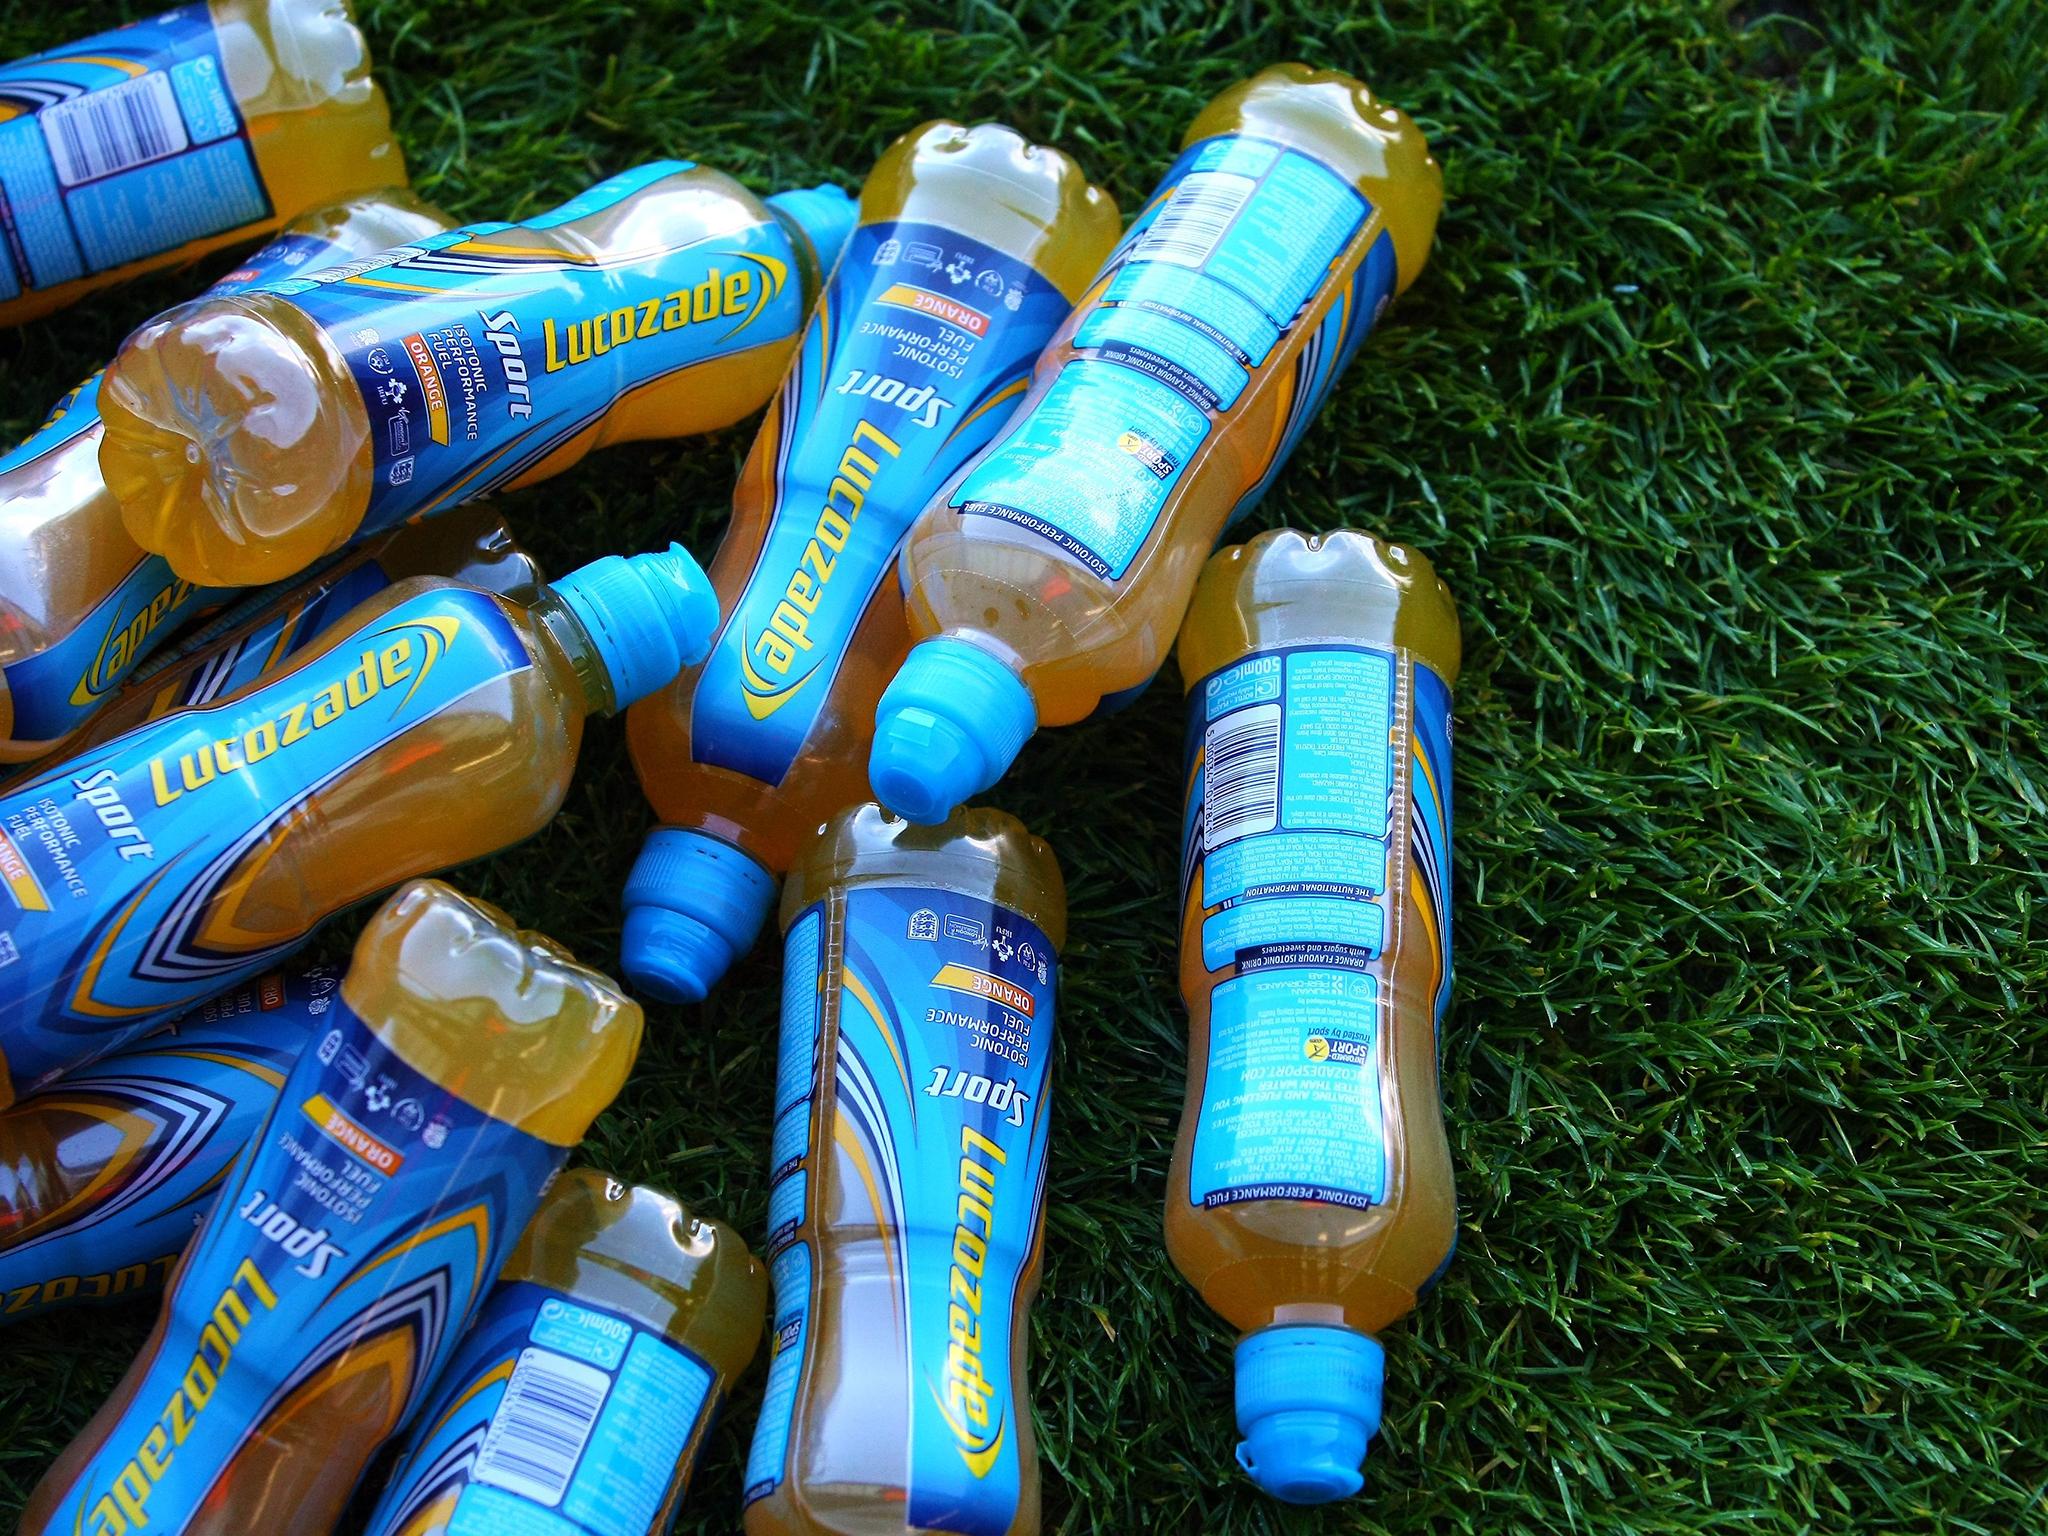 Lucozade fans have complained that the news recipe isn't up to scratch